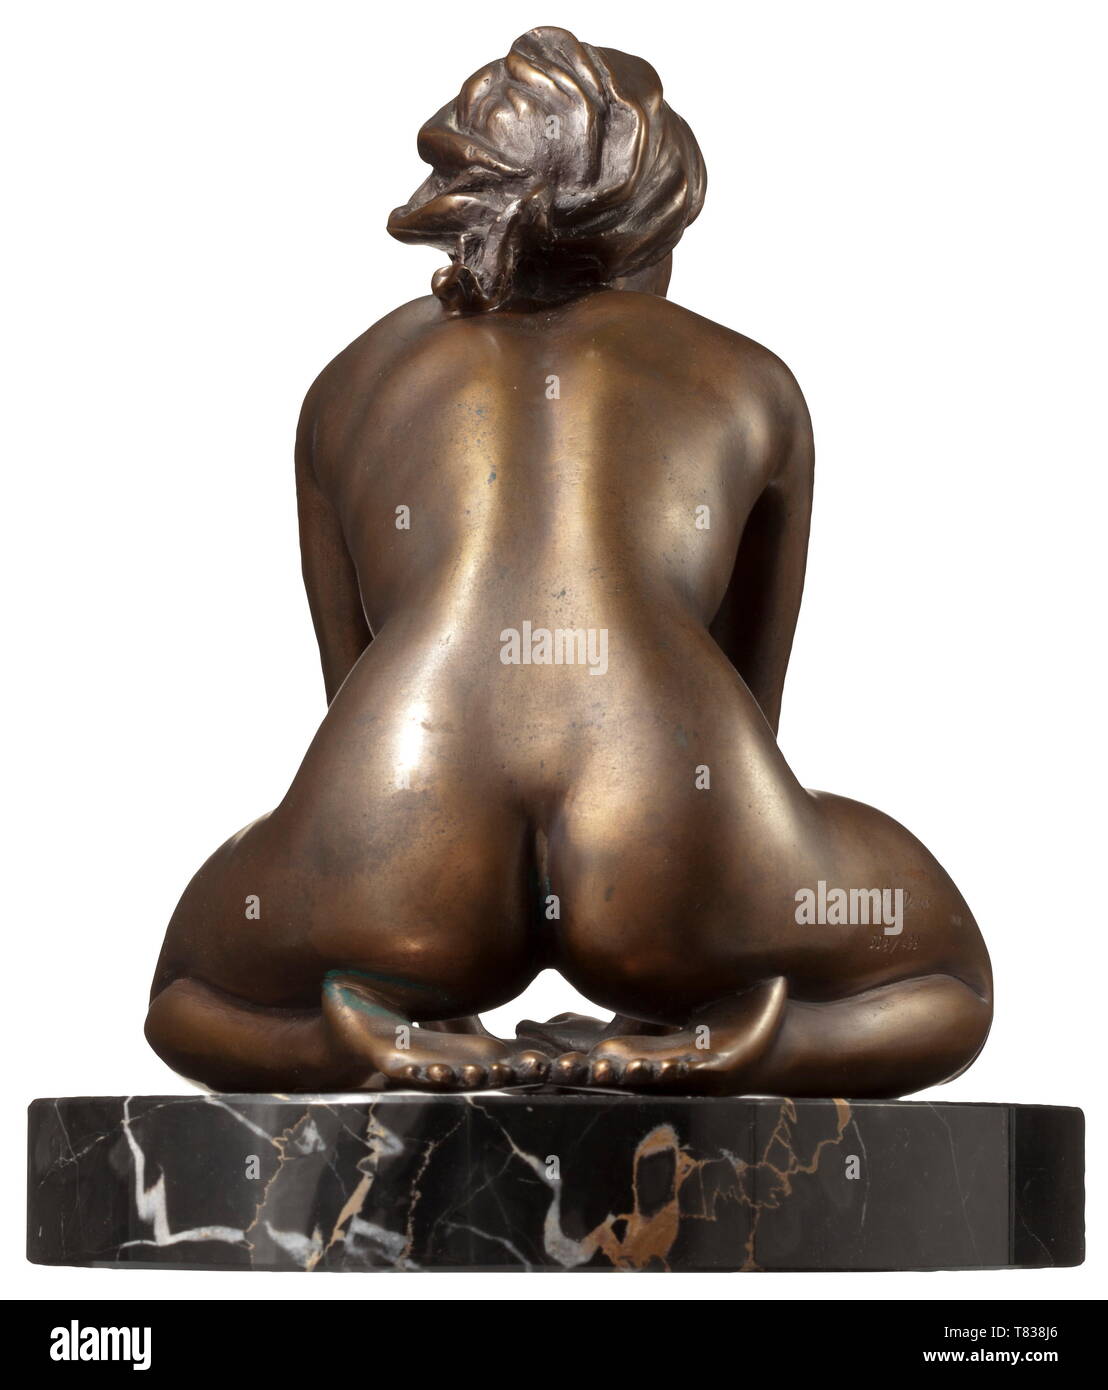 Arno Breker (1900 - 1991) - Girl with a Headscarf Bronze with brown patina. Signed on the right calf 'Arno Breker', foundry stamp 'venturi arte' and number '308/499'. On beautiful marble base. Total height circa 23 cm. Good condition. Impressive, elegantly formed bronze statuette. Arno Breker is regarded as one of the most significant sculptors of classical tradition in the 20th century. In the long French-influenced European sculpting tradition he ranks among such names as Auguste Rodin, Charles Despiau and Aristide Maillol. historic, historical, 20th century, 1930s, 1940s, Editorial-Use-Only Stock Photo